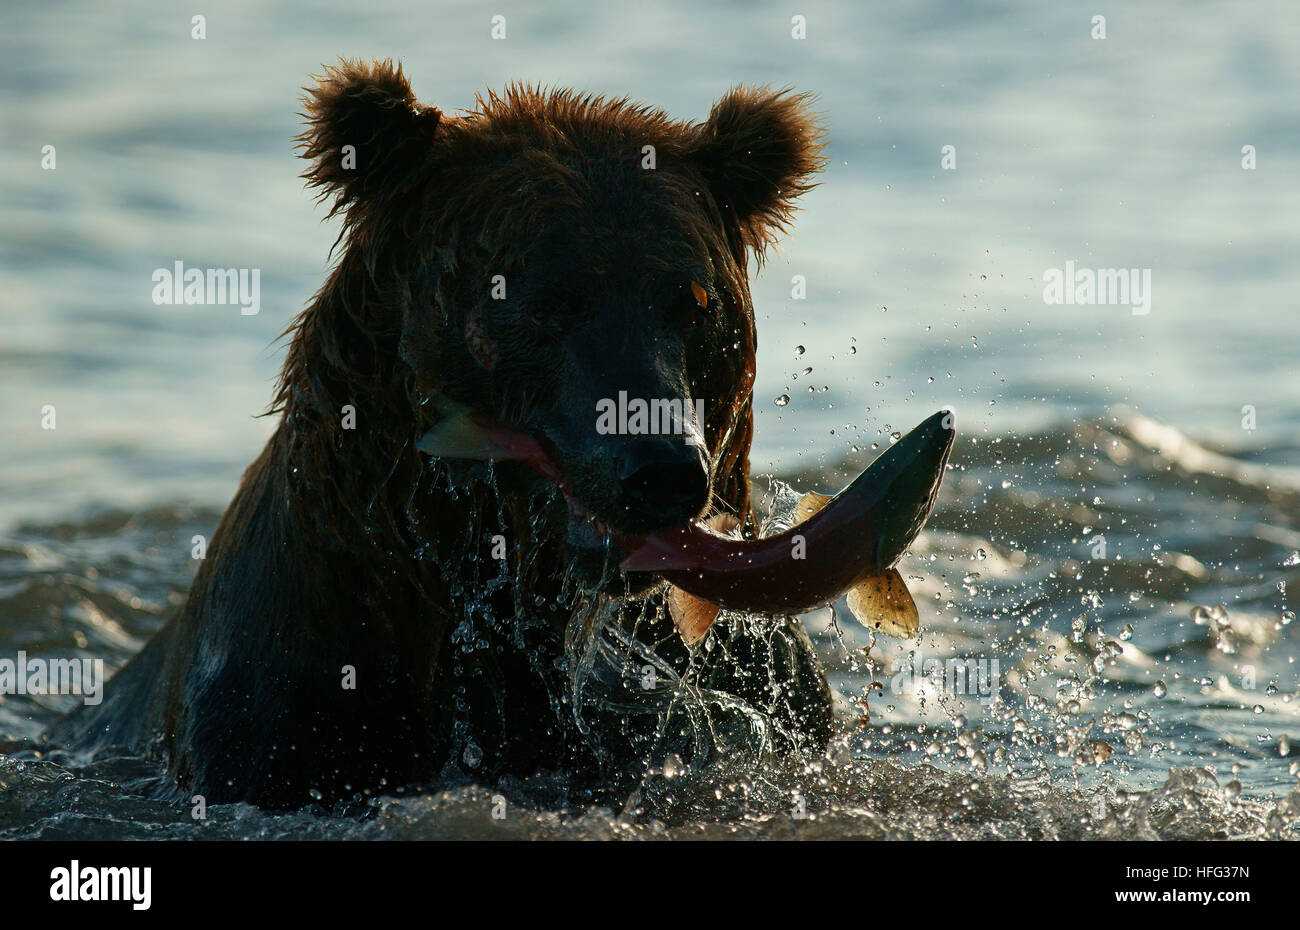 Brown bear (Ursus arctos) hunting, with salmon in its mouth, Backlit, Kurile Lake in Kamchatka, Russia Stock Photo